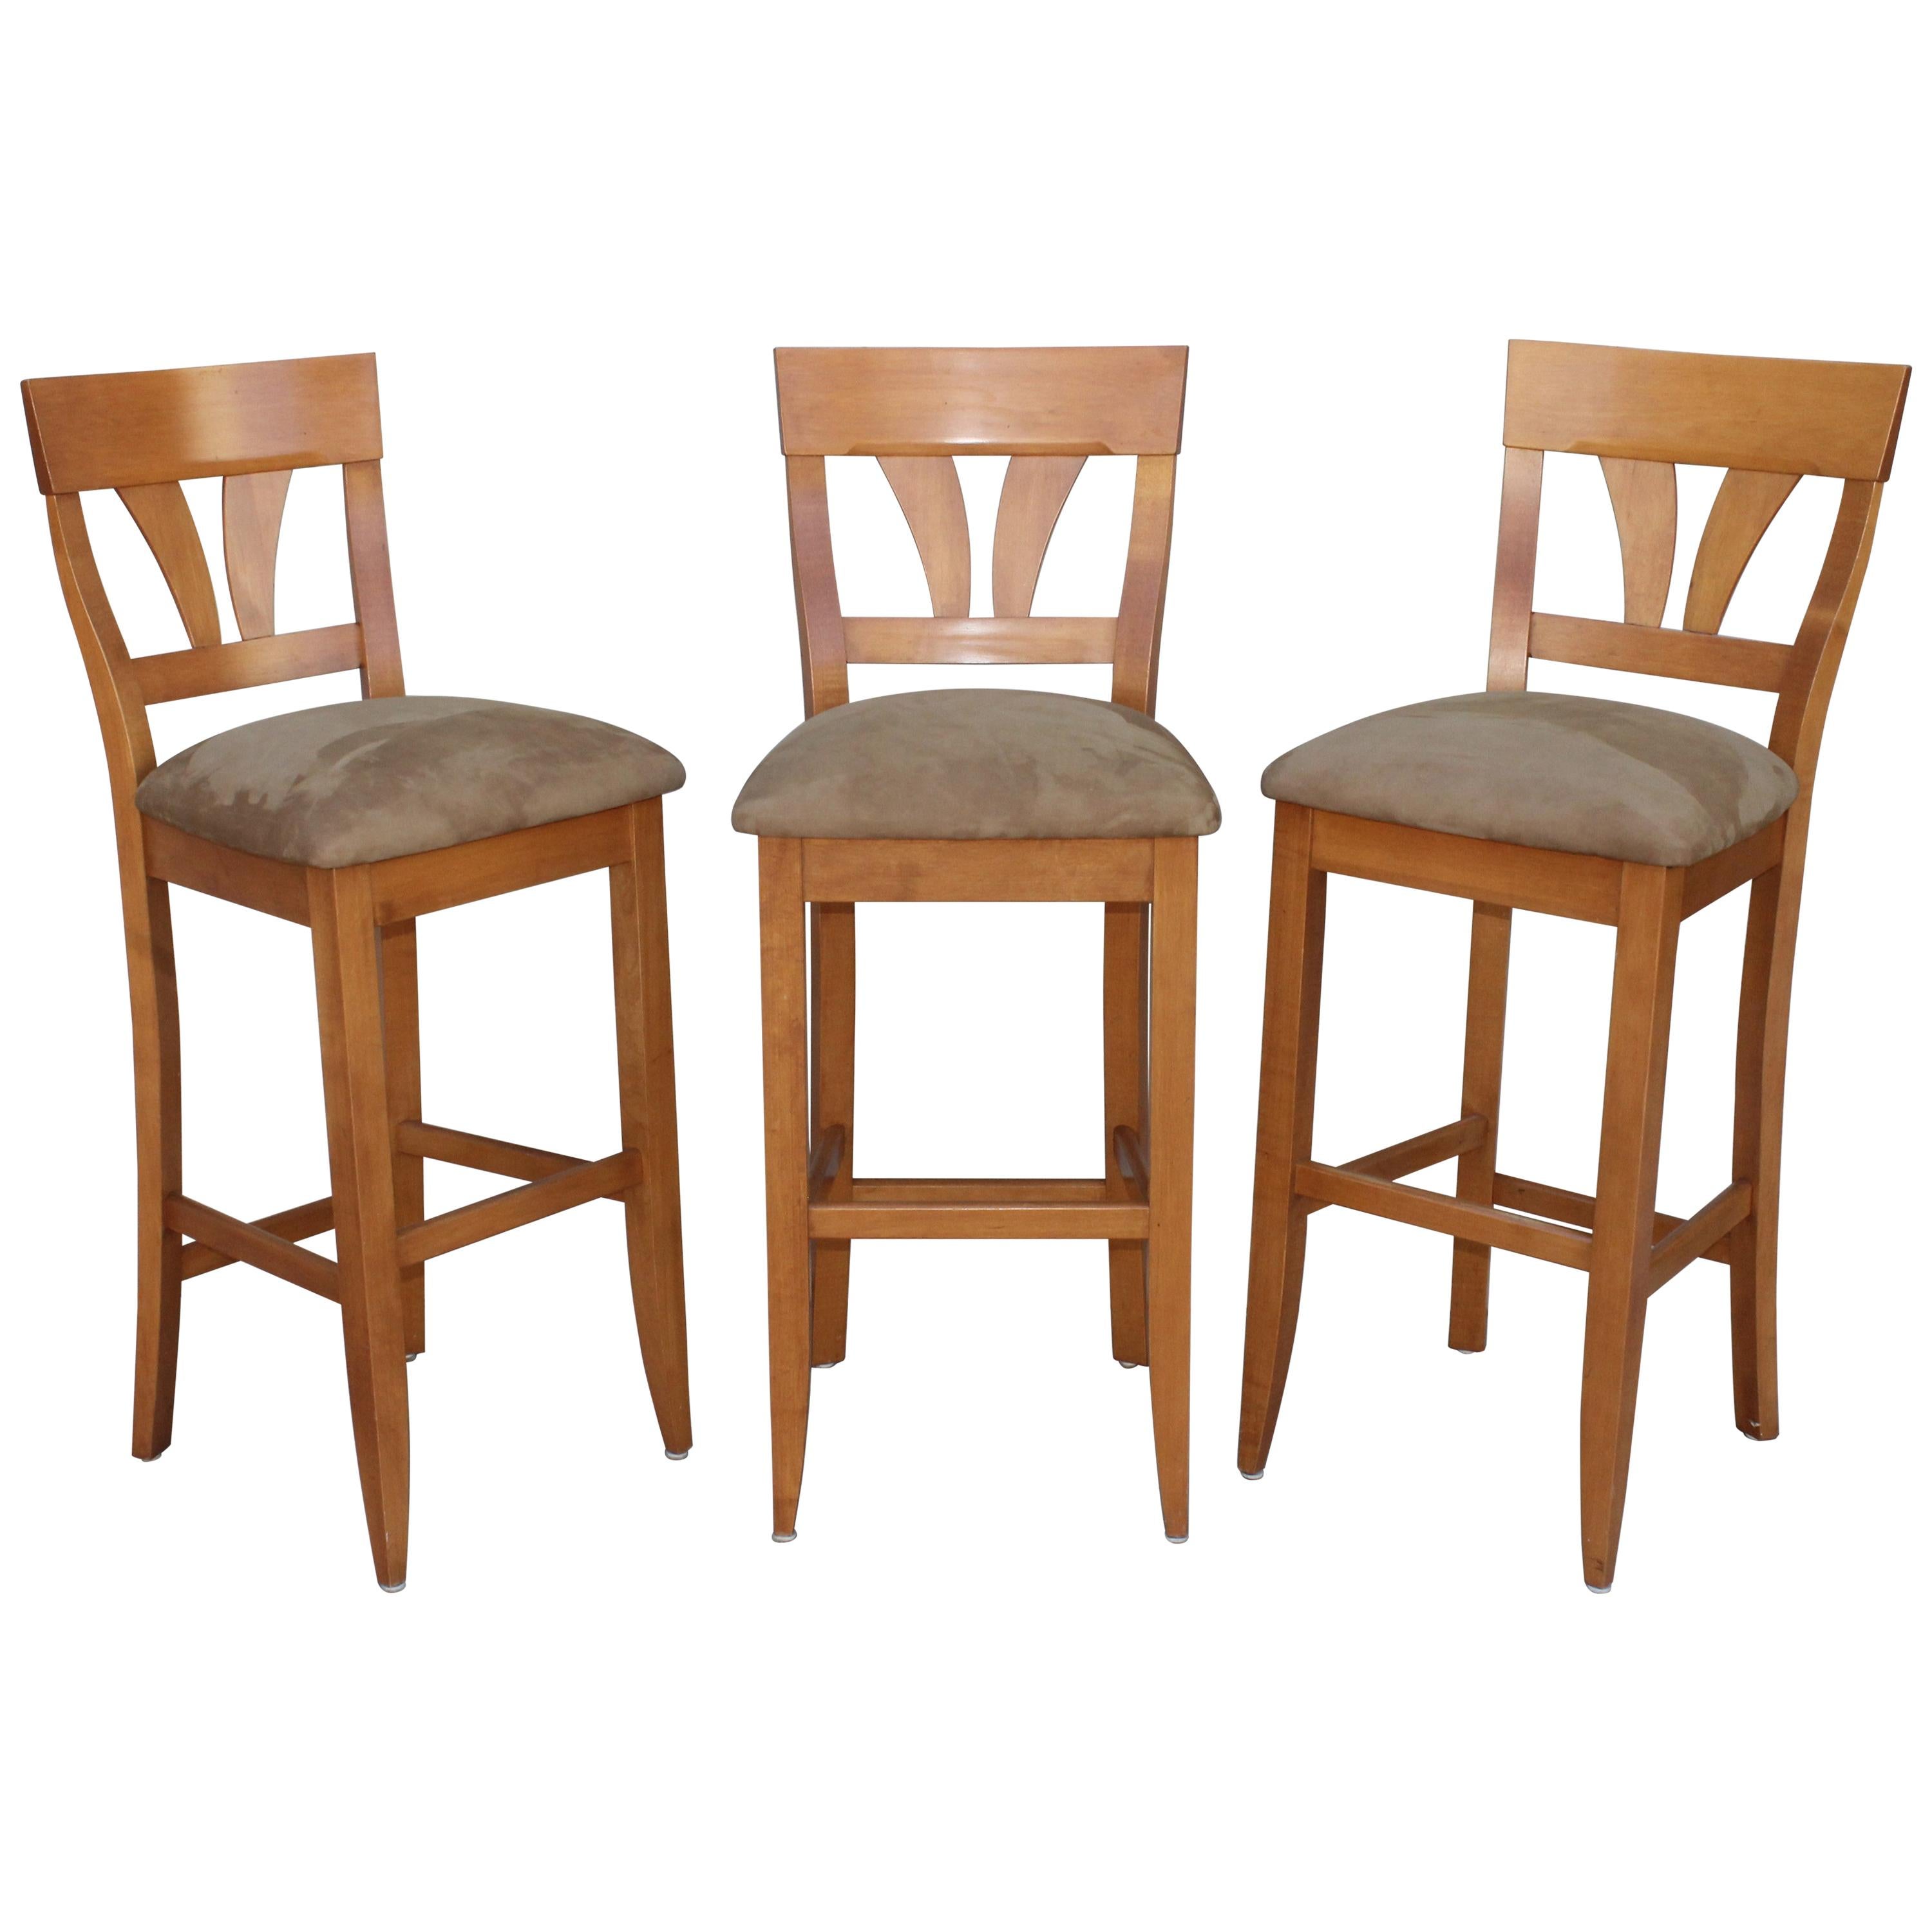 Vintage High Back Bar Stools With Suede Seats